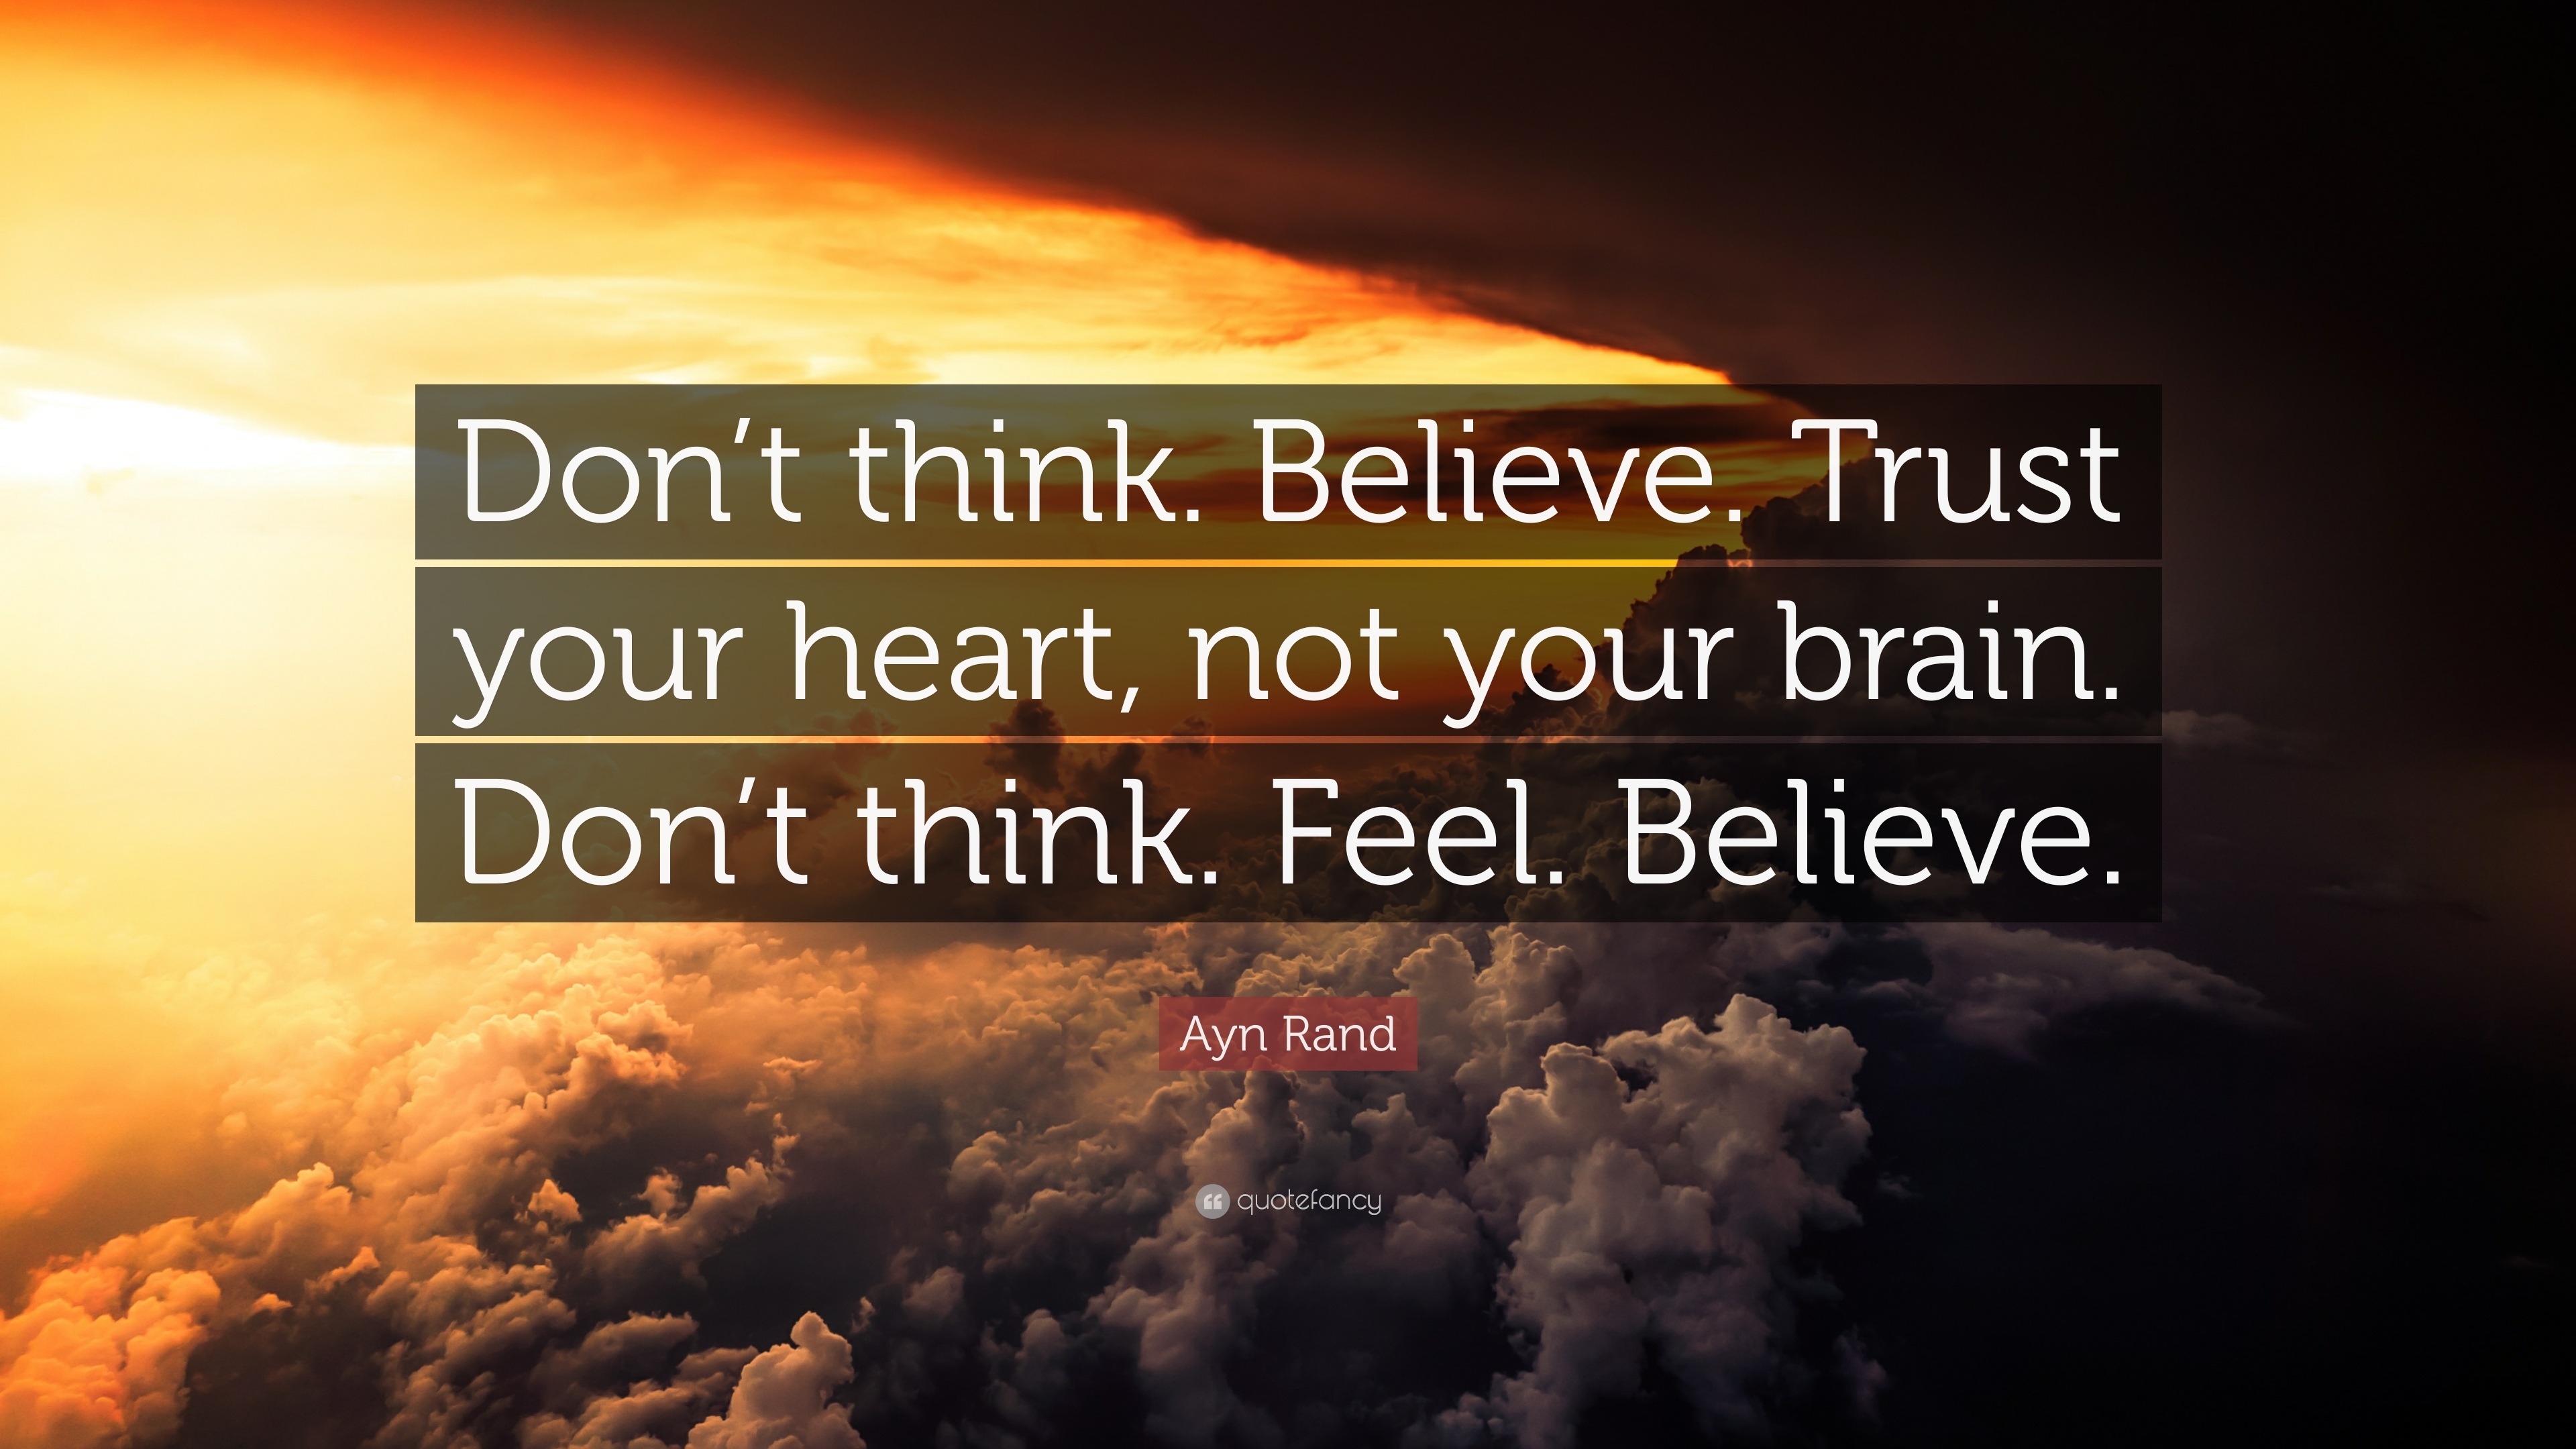 Ayn Rand Quote Don T Think Believe Trust Your Heart Not Your Brain Don T Think Feel Believe 12 Wallpapers Quotefancy